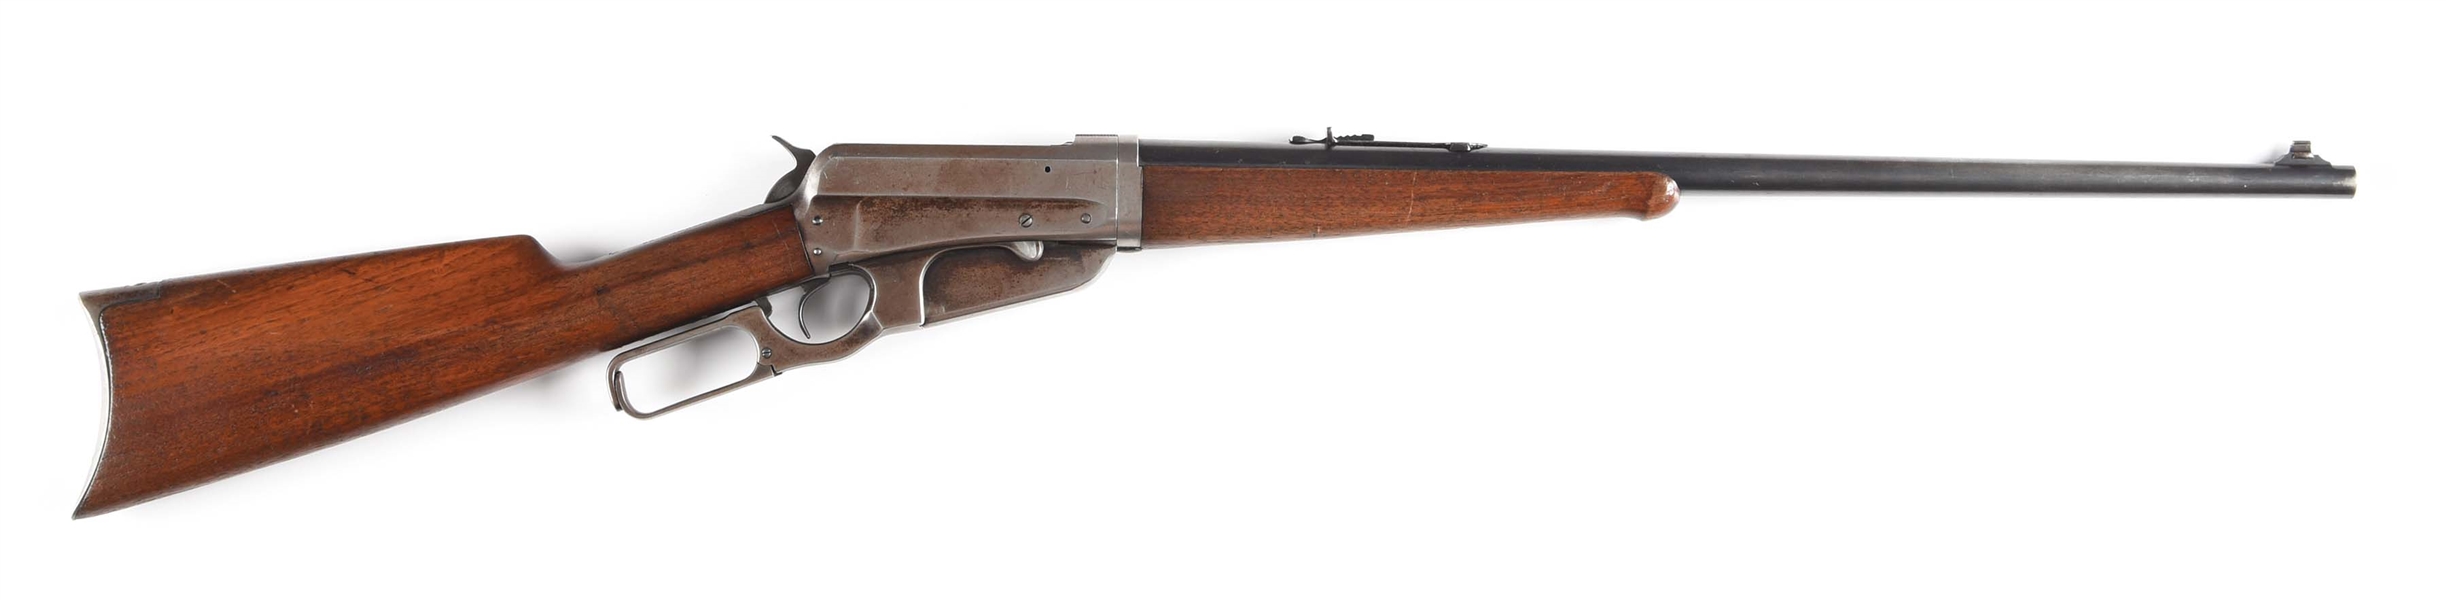 (C) WINCHESTER MODEL 1895 TAKEDOWN LEVER ACTION RIFLE (1922).